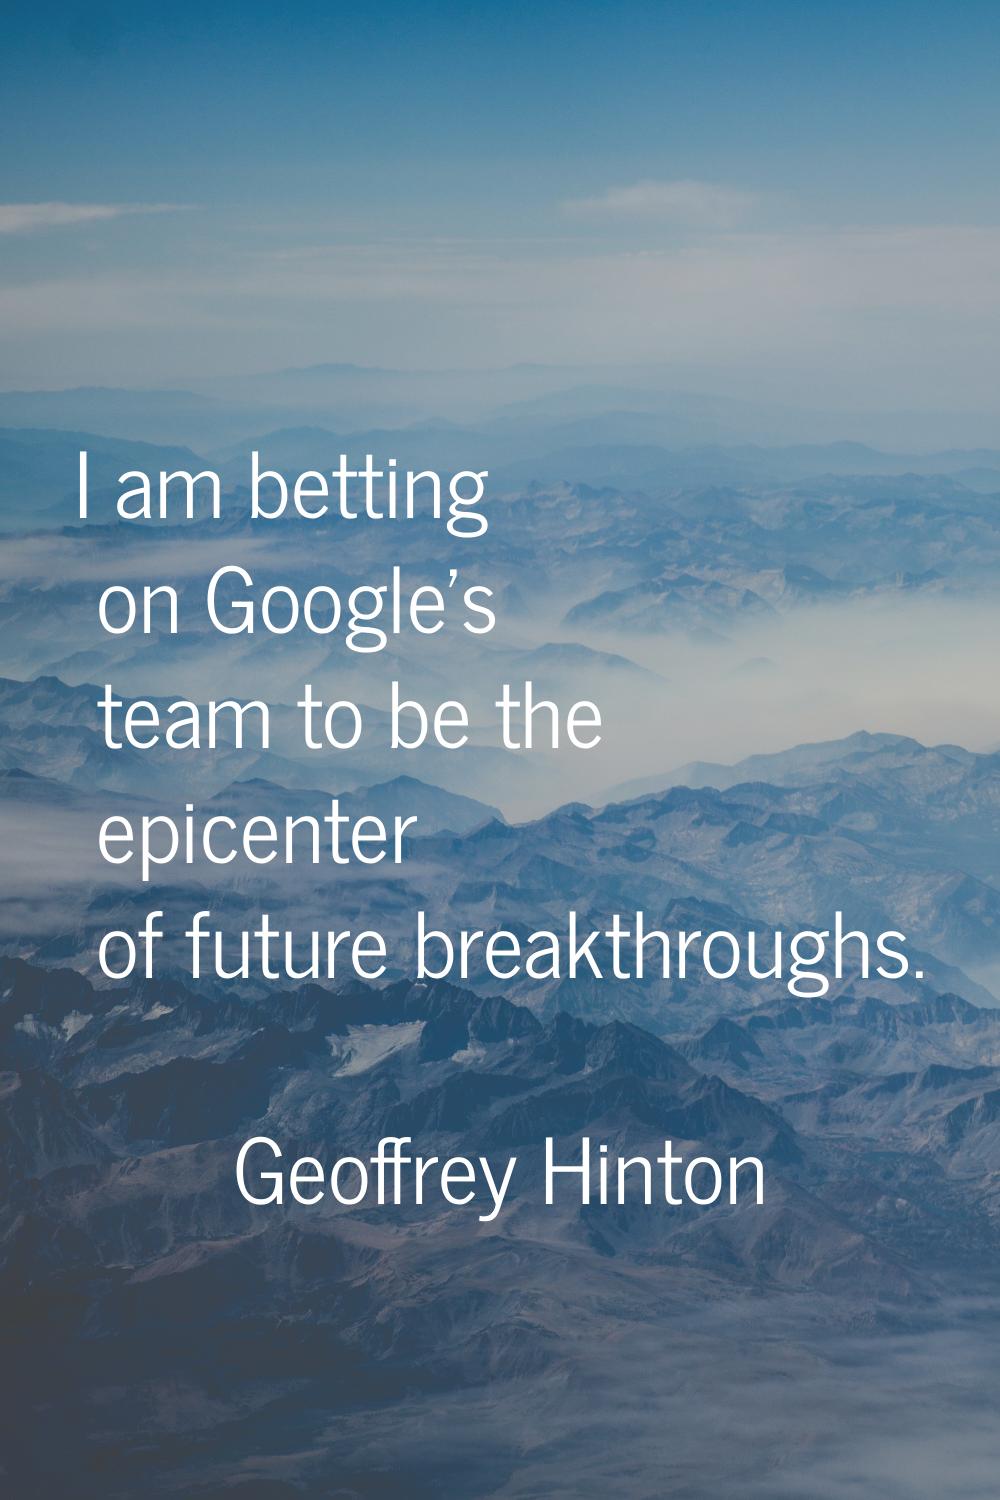 I am betting on Google's team to be the epicenter of future breakthroughs.